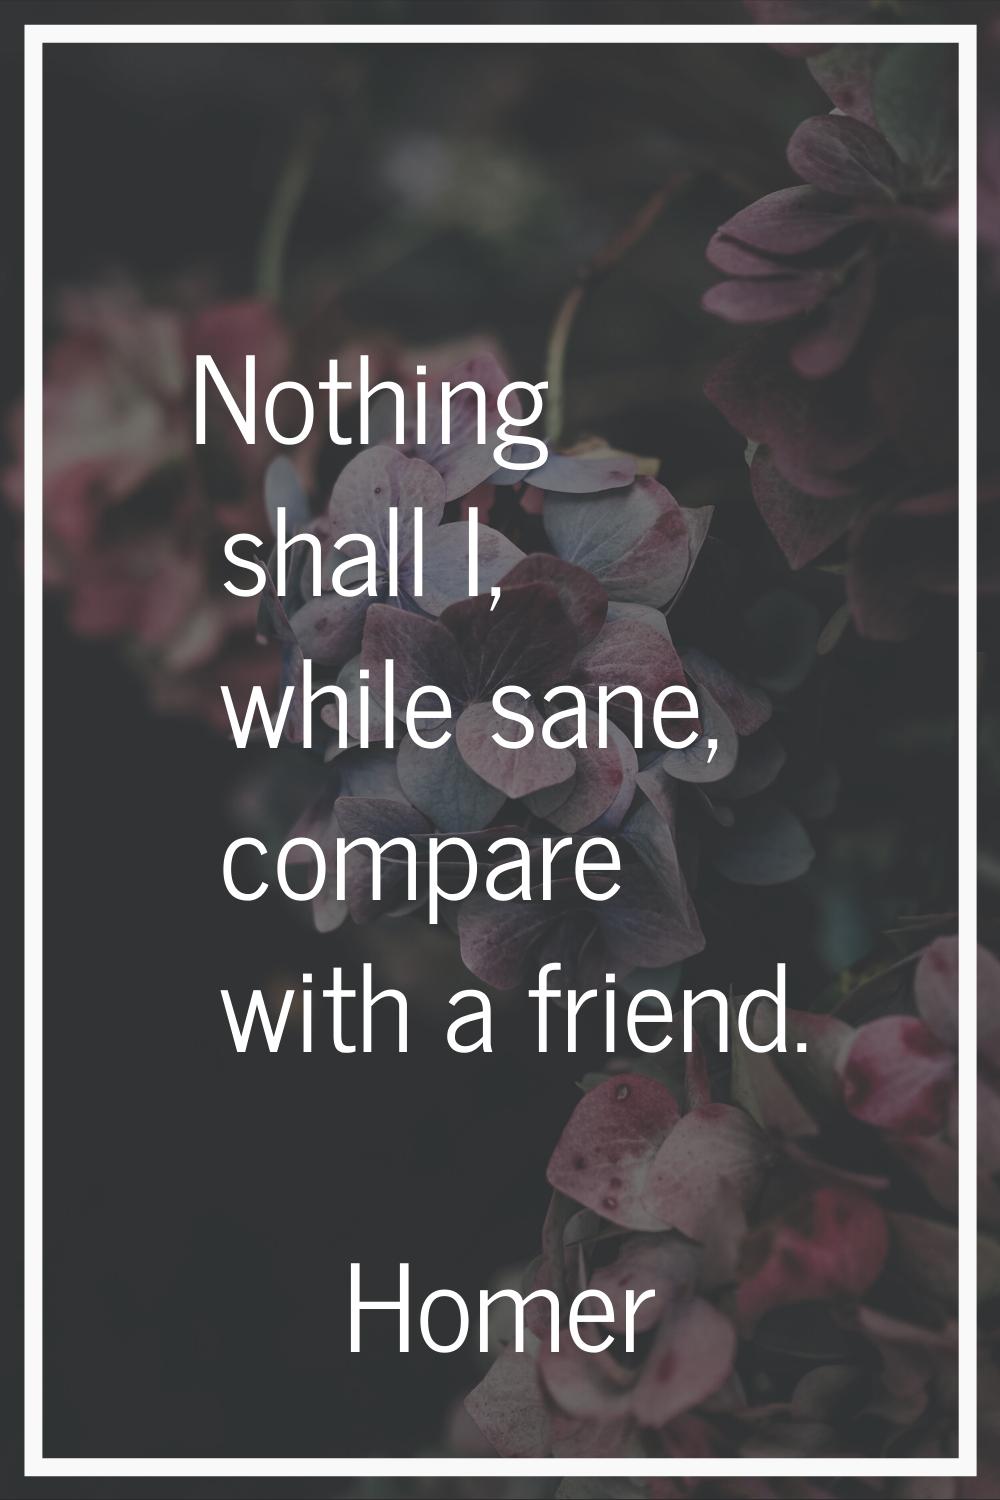 Nothing shall I, while sane, compare with a friend.